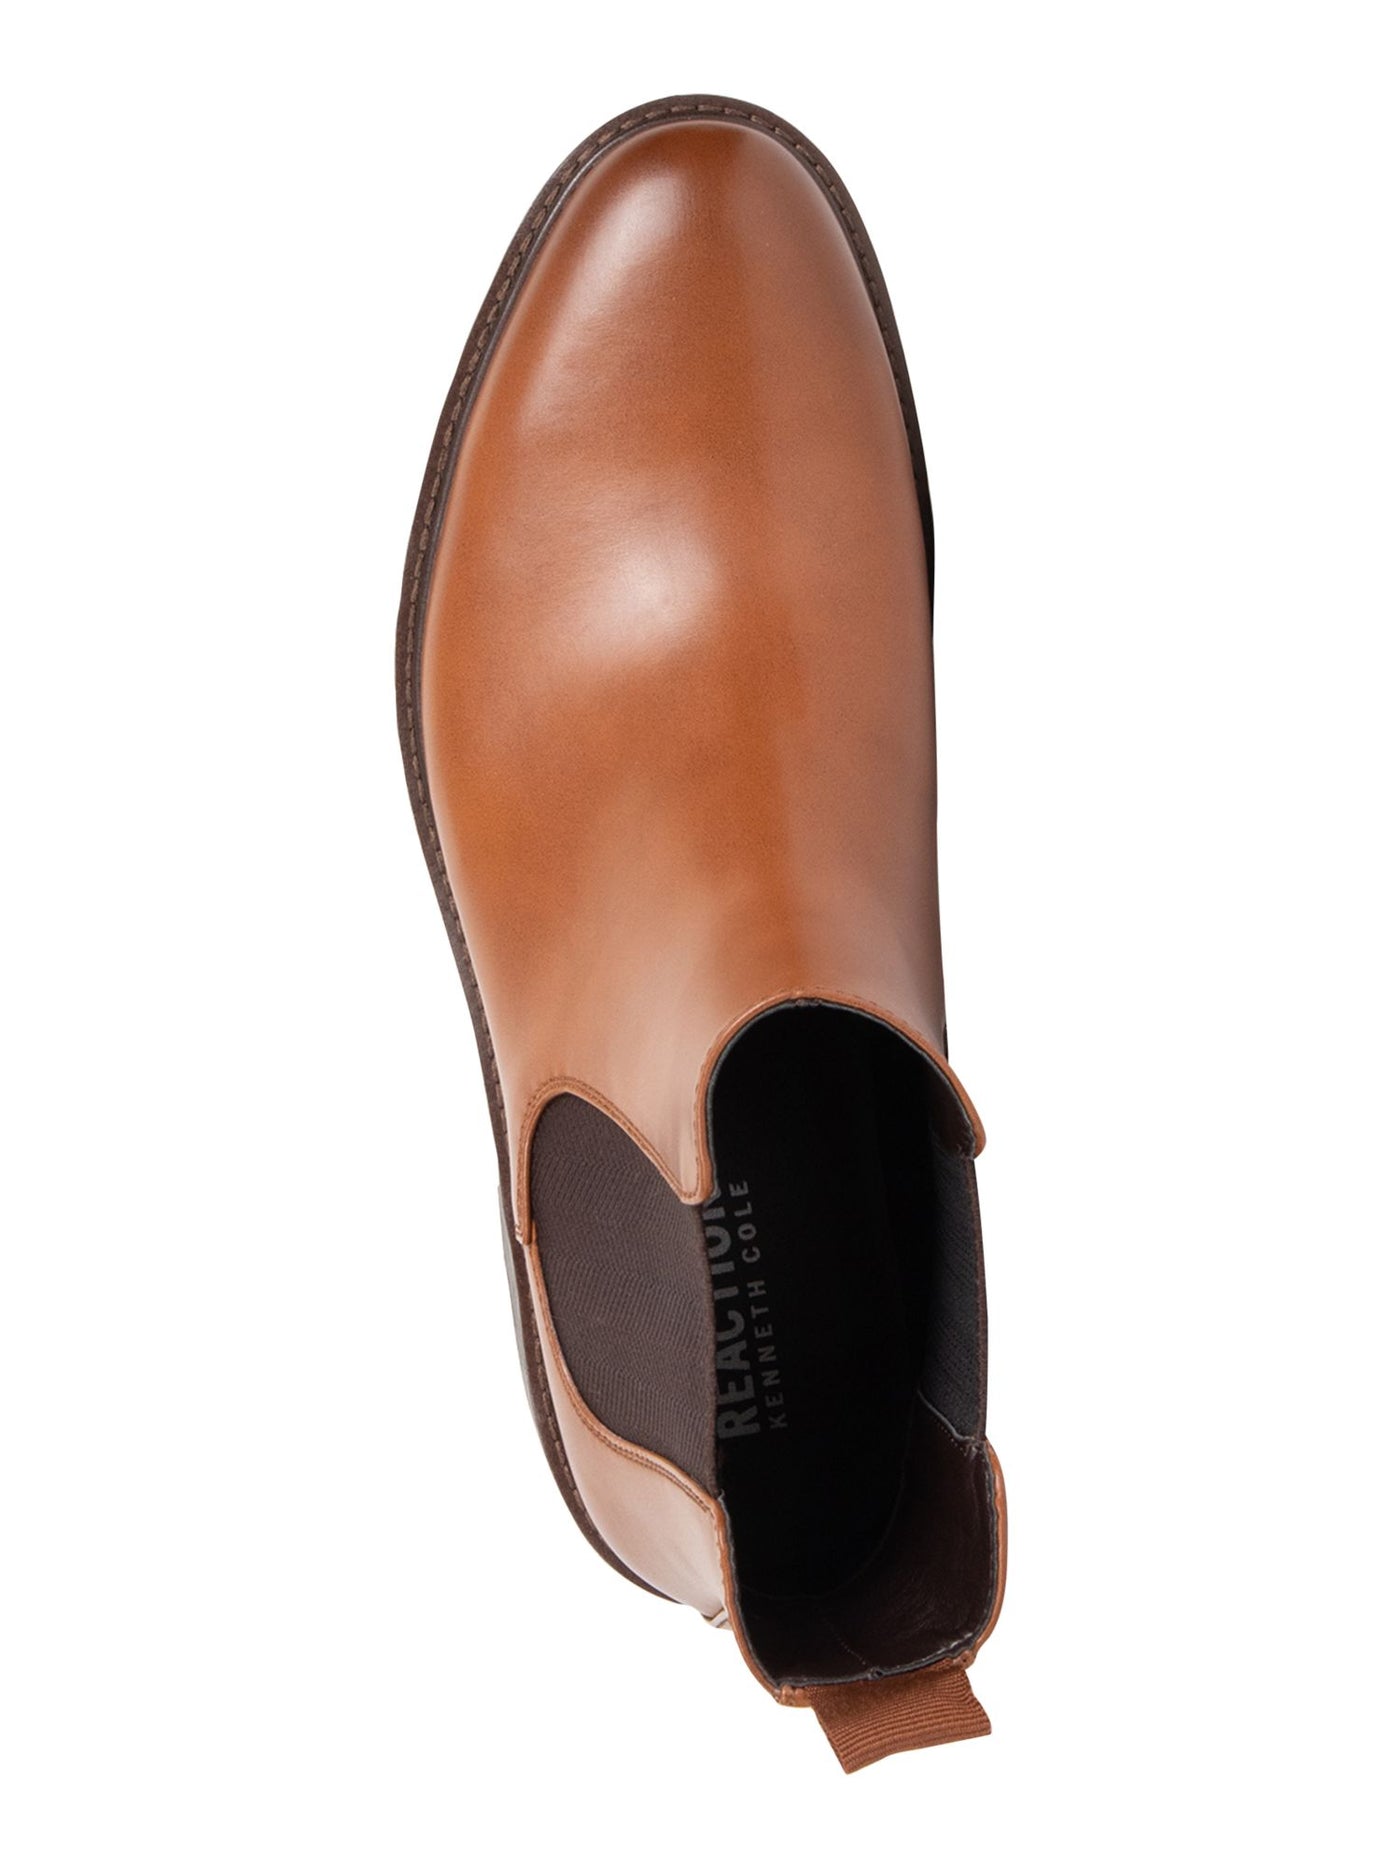 REACTION KENNETH COLE Mens Brown Goring Ely Round Toe Slip On Dress Chelsea 10.5 M